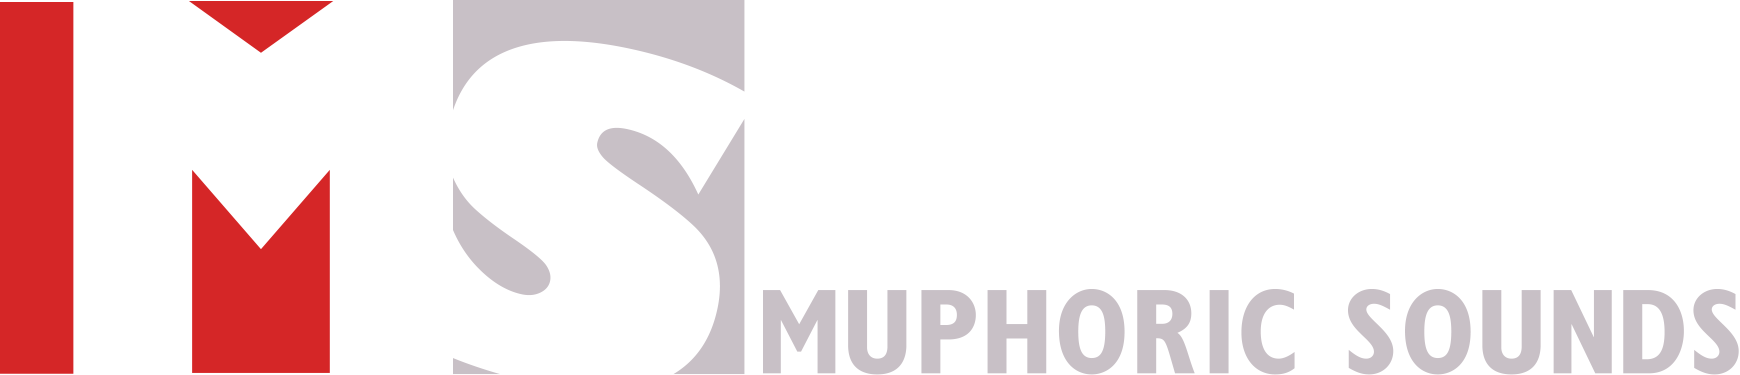 Muphoric Sounds